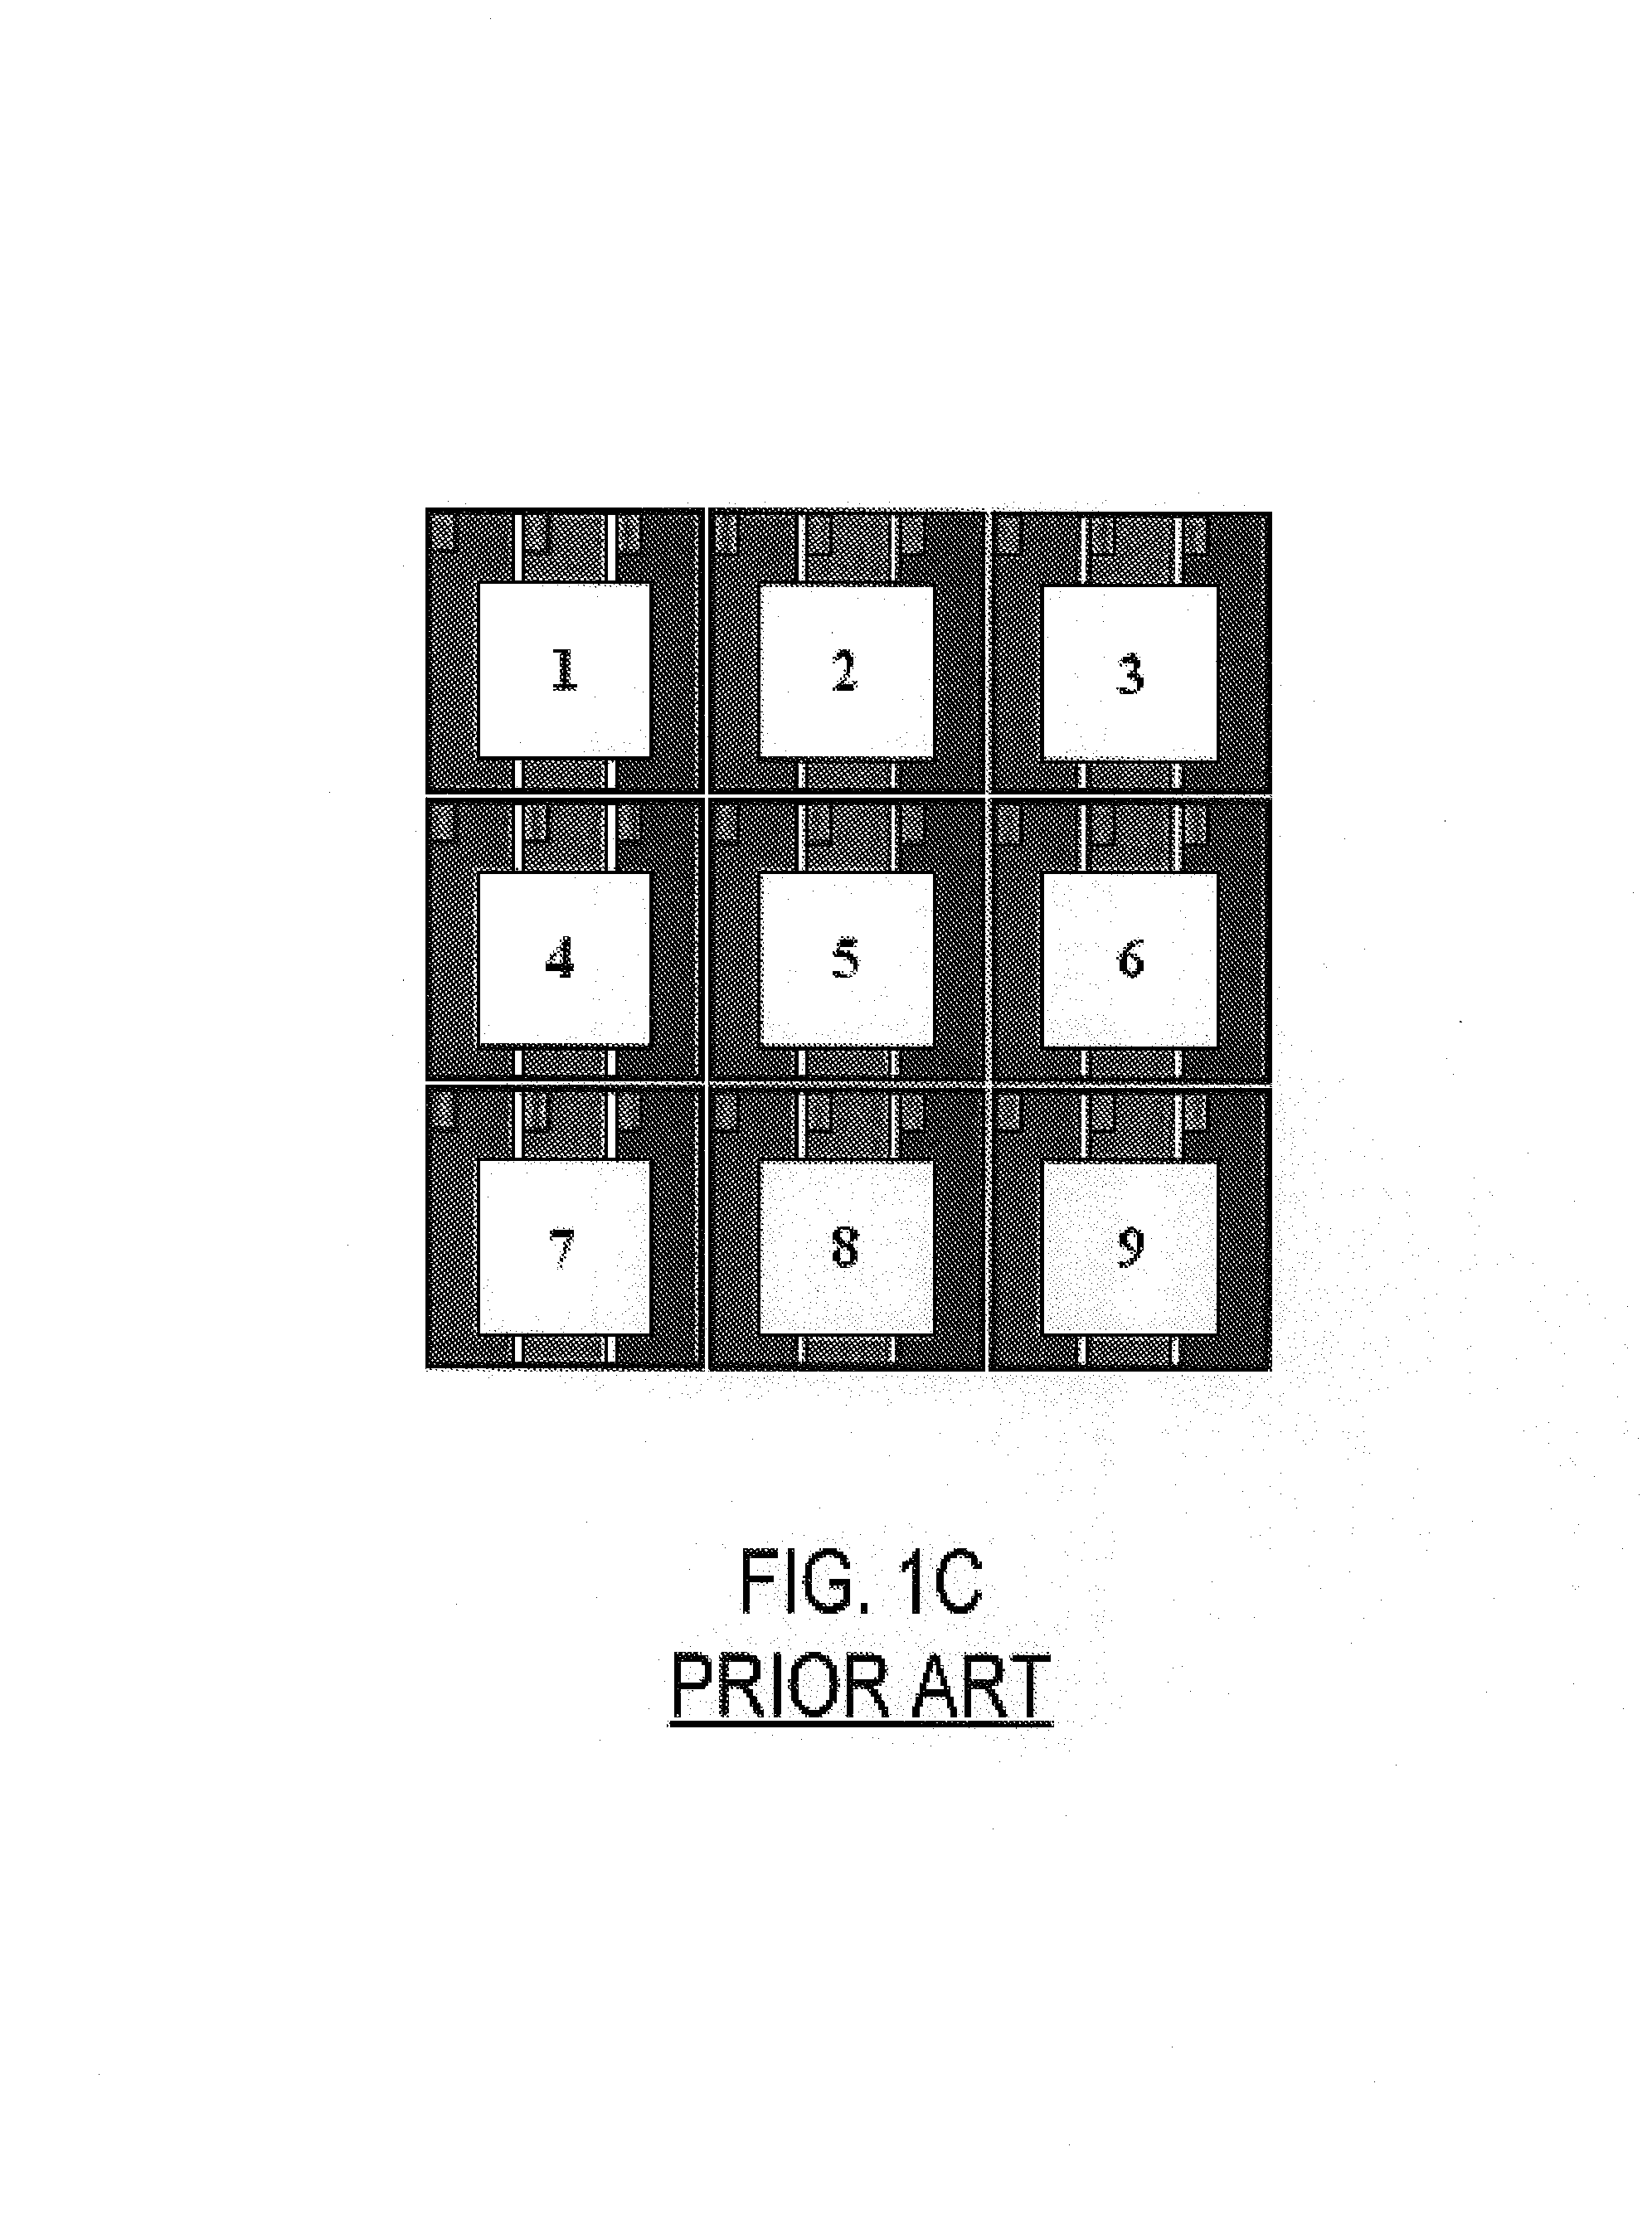 High-resolution micro-lens 3D display with shared sub-pixel color signals